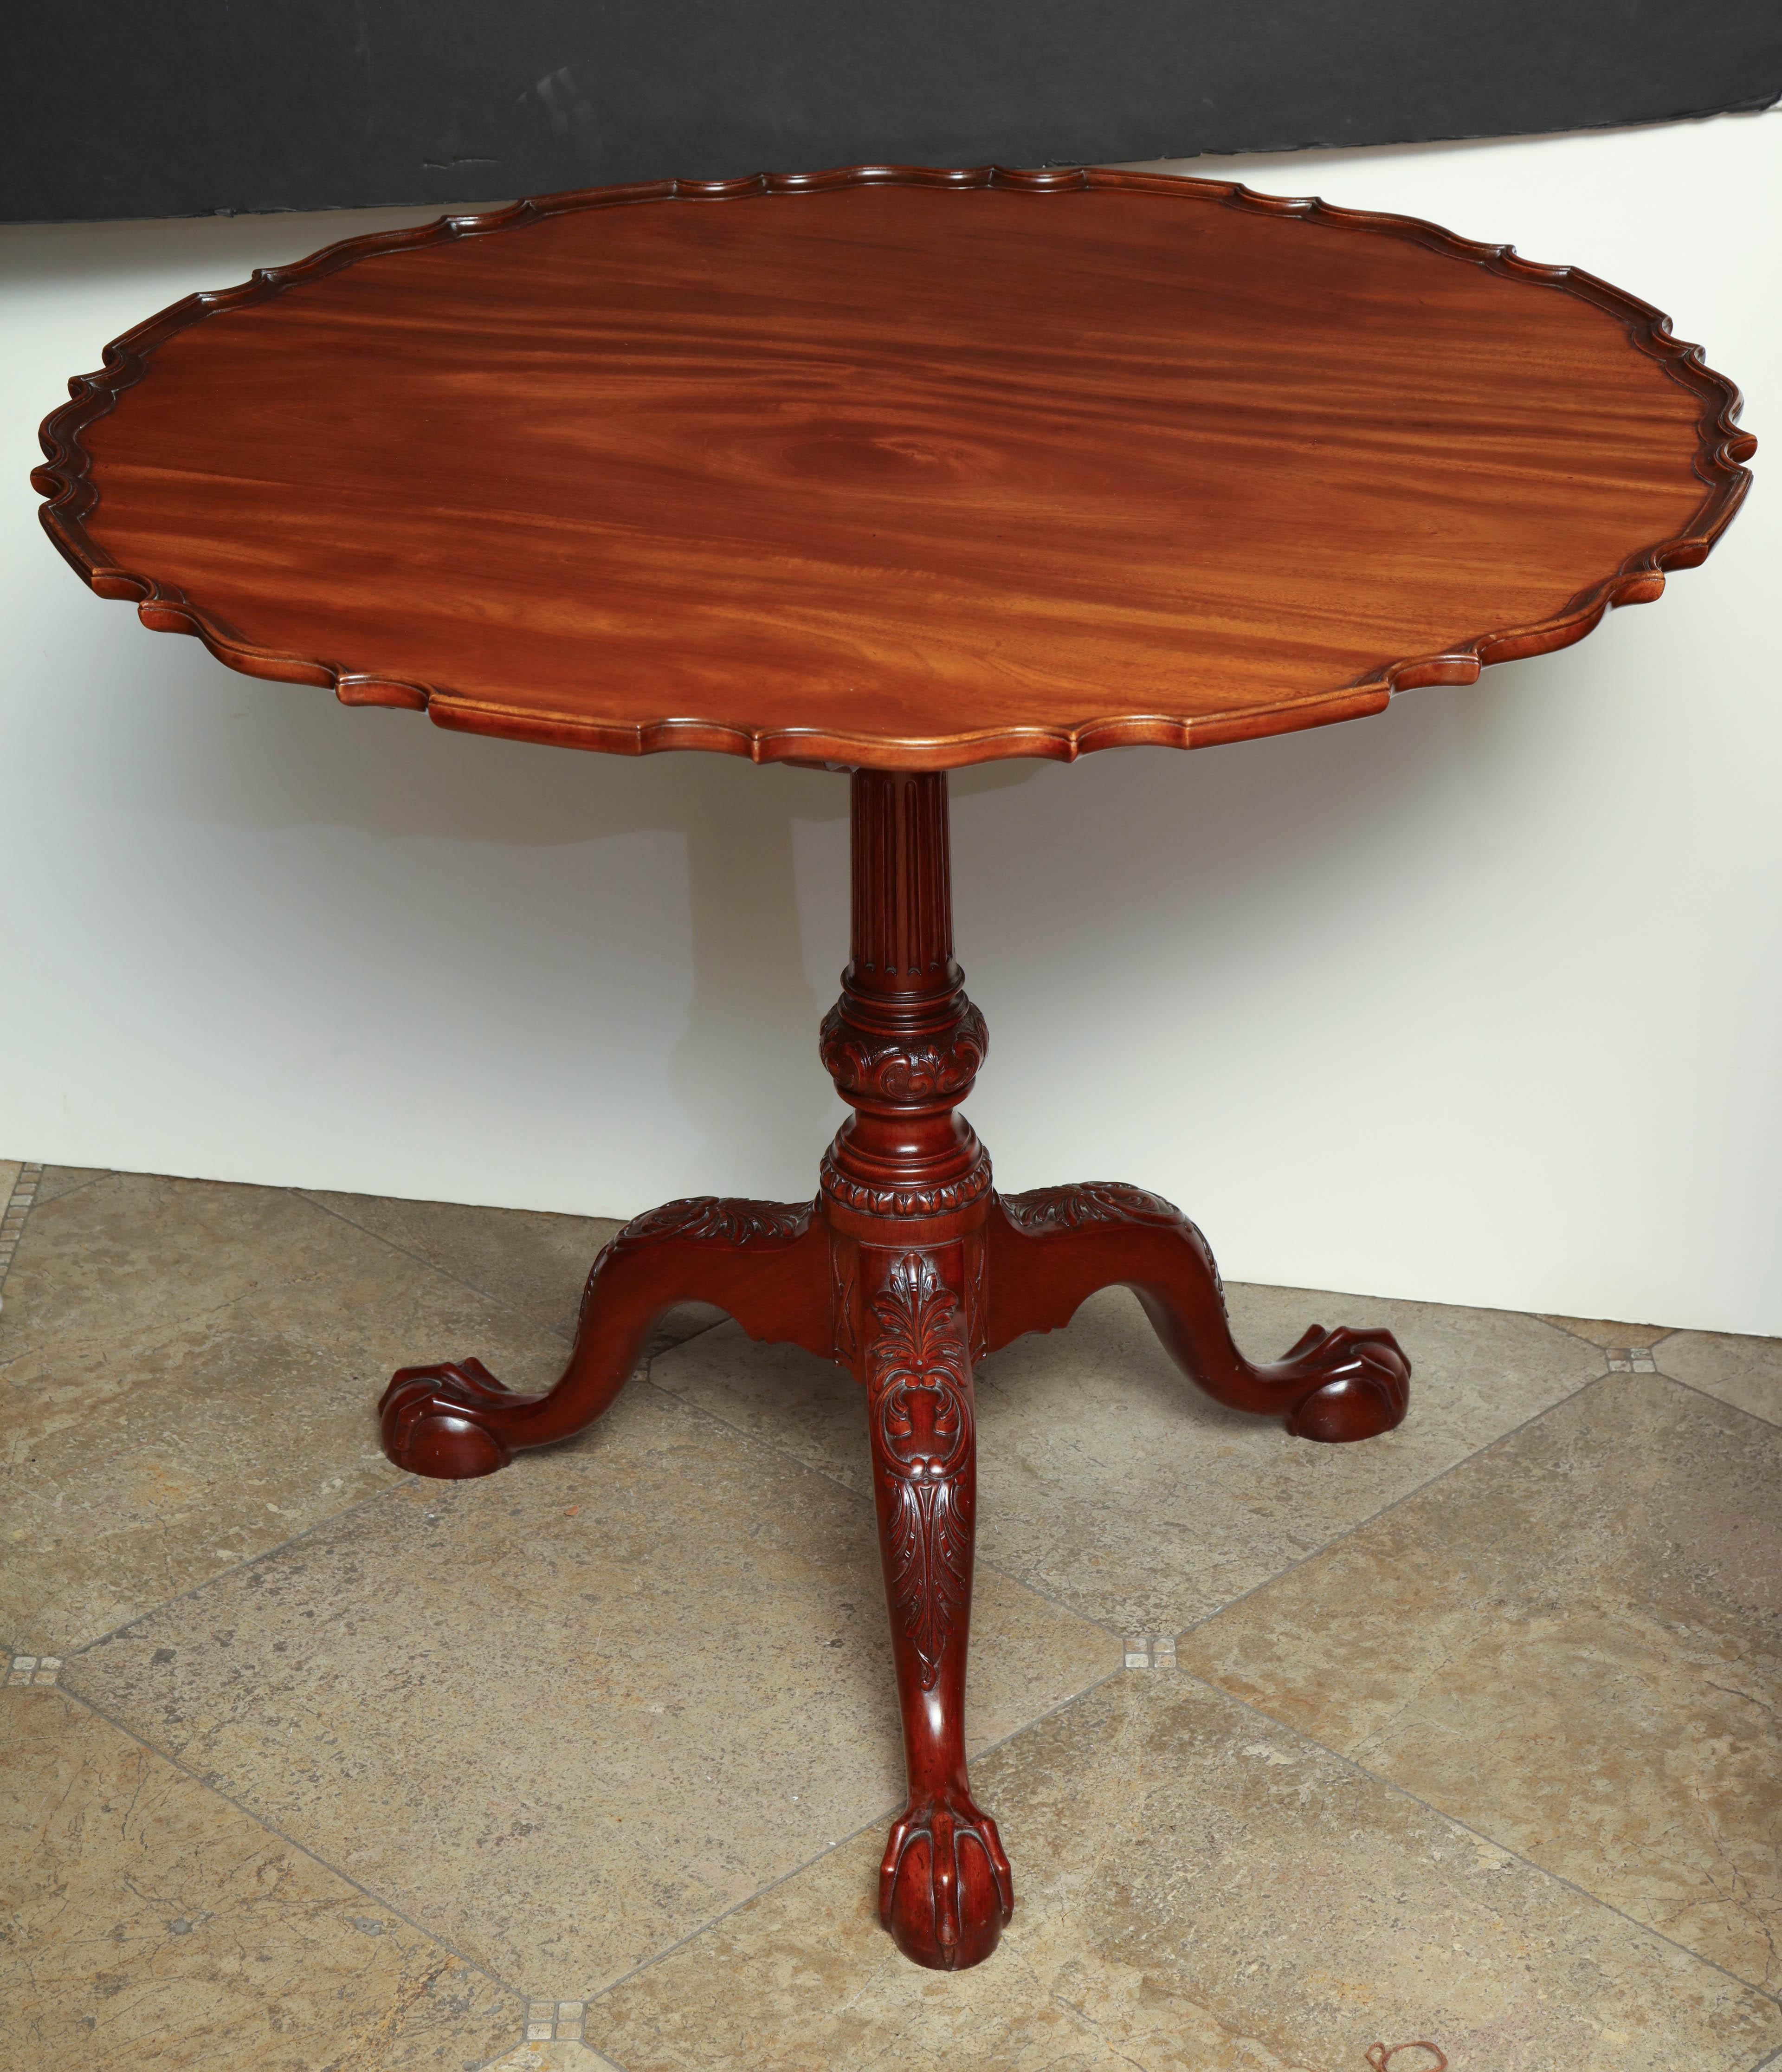 A large George II style carved mahogany pie crust tilt table with carved urn pedestal, carved cabriole legs on claw and ball feet.